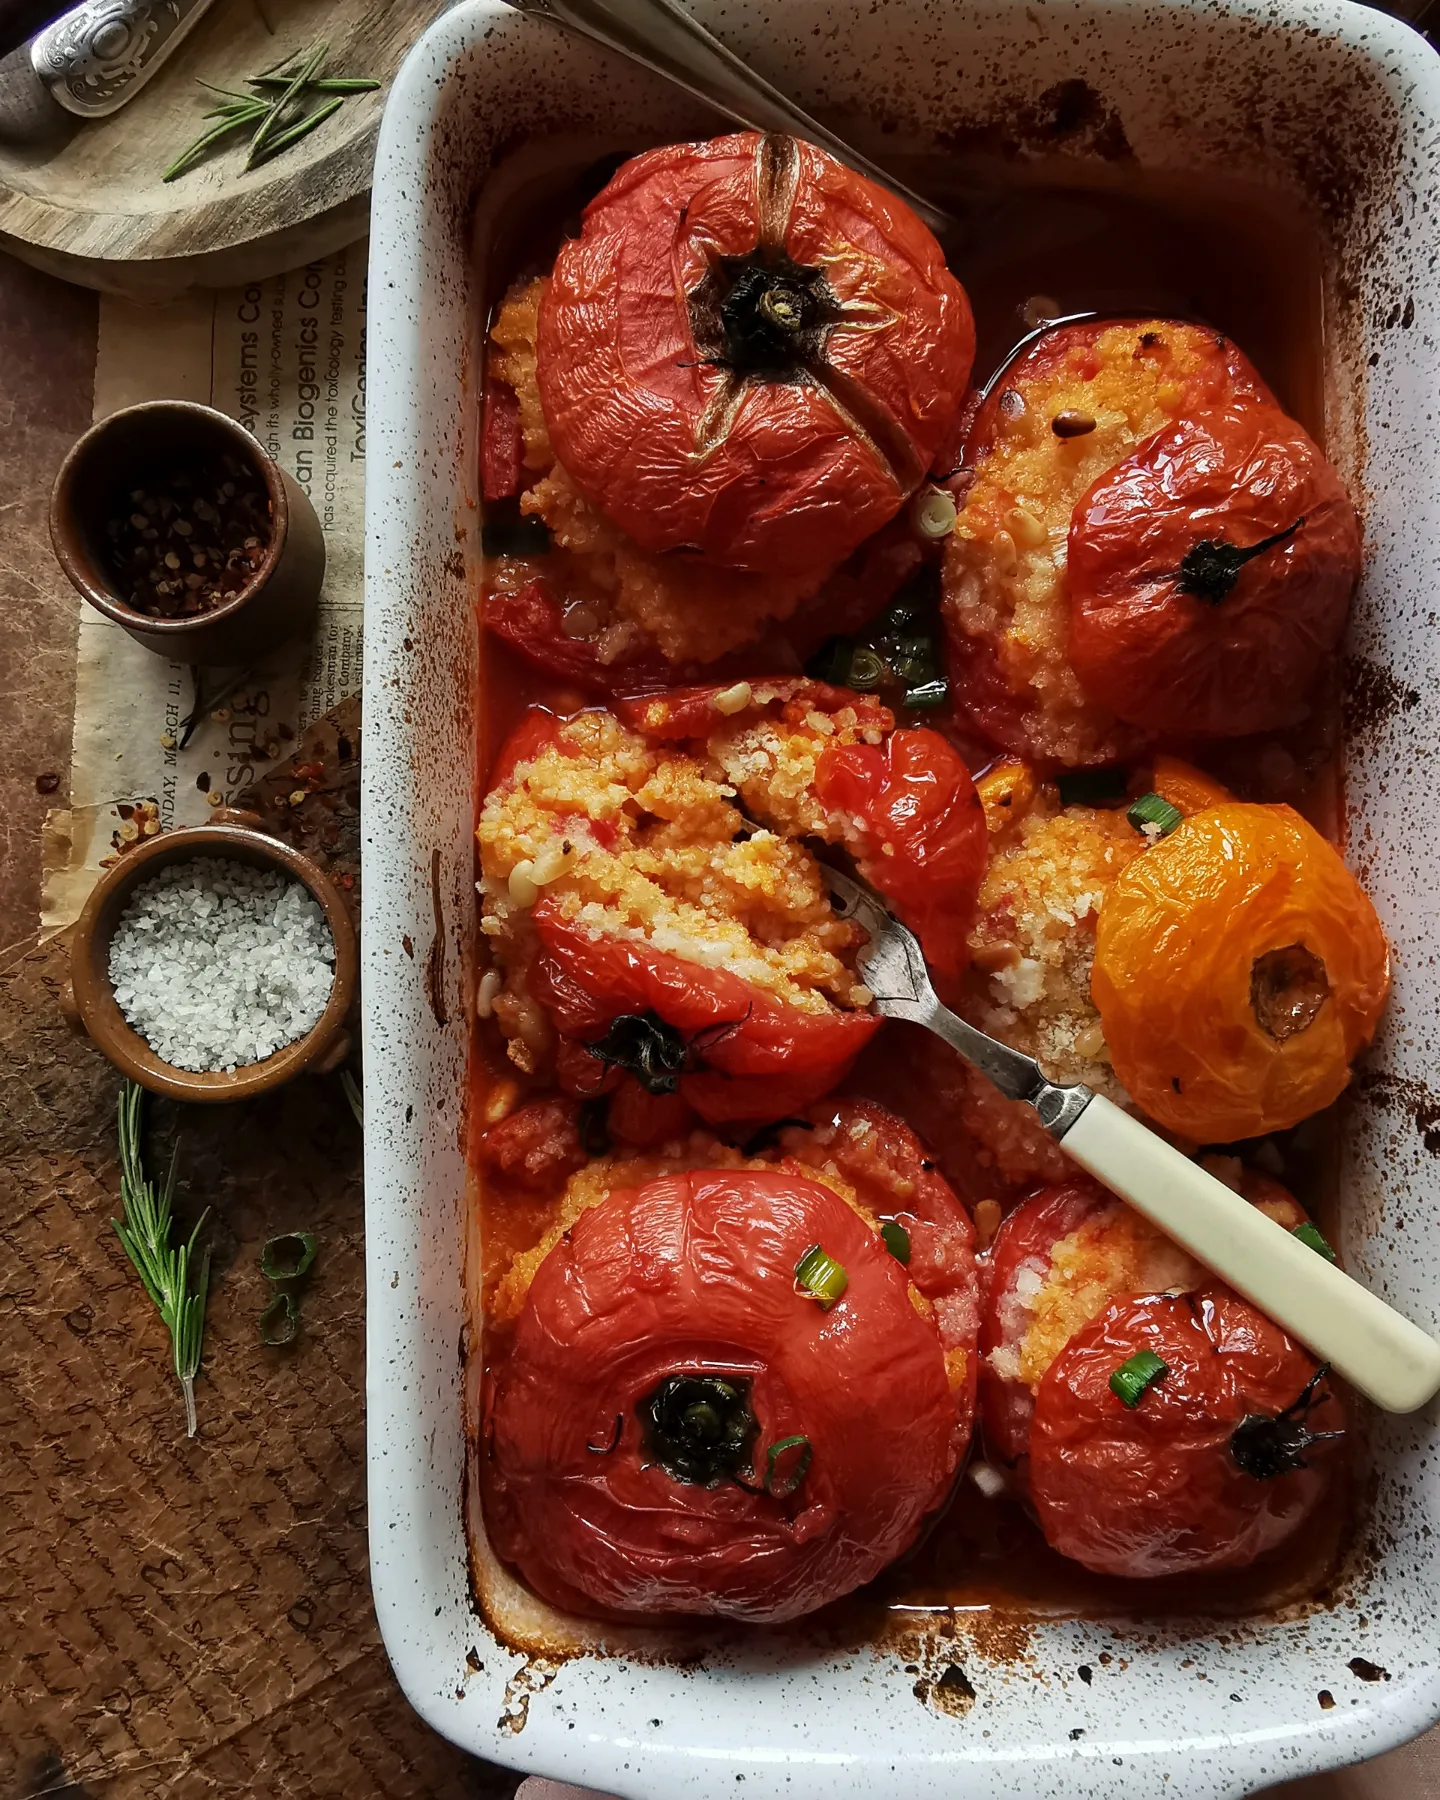 Millet stuffed tomatoes